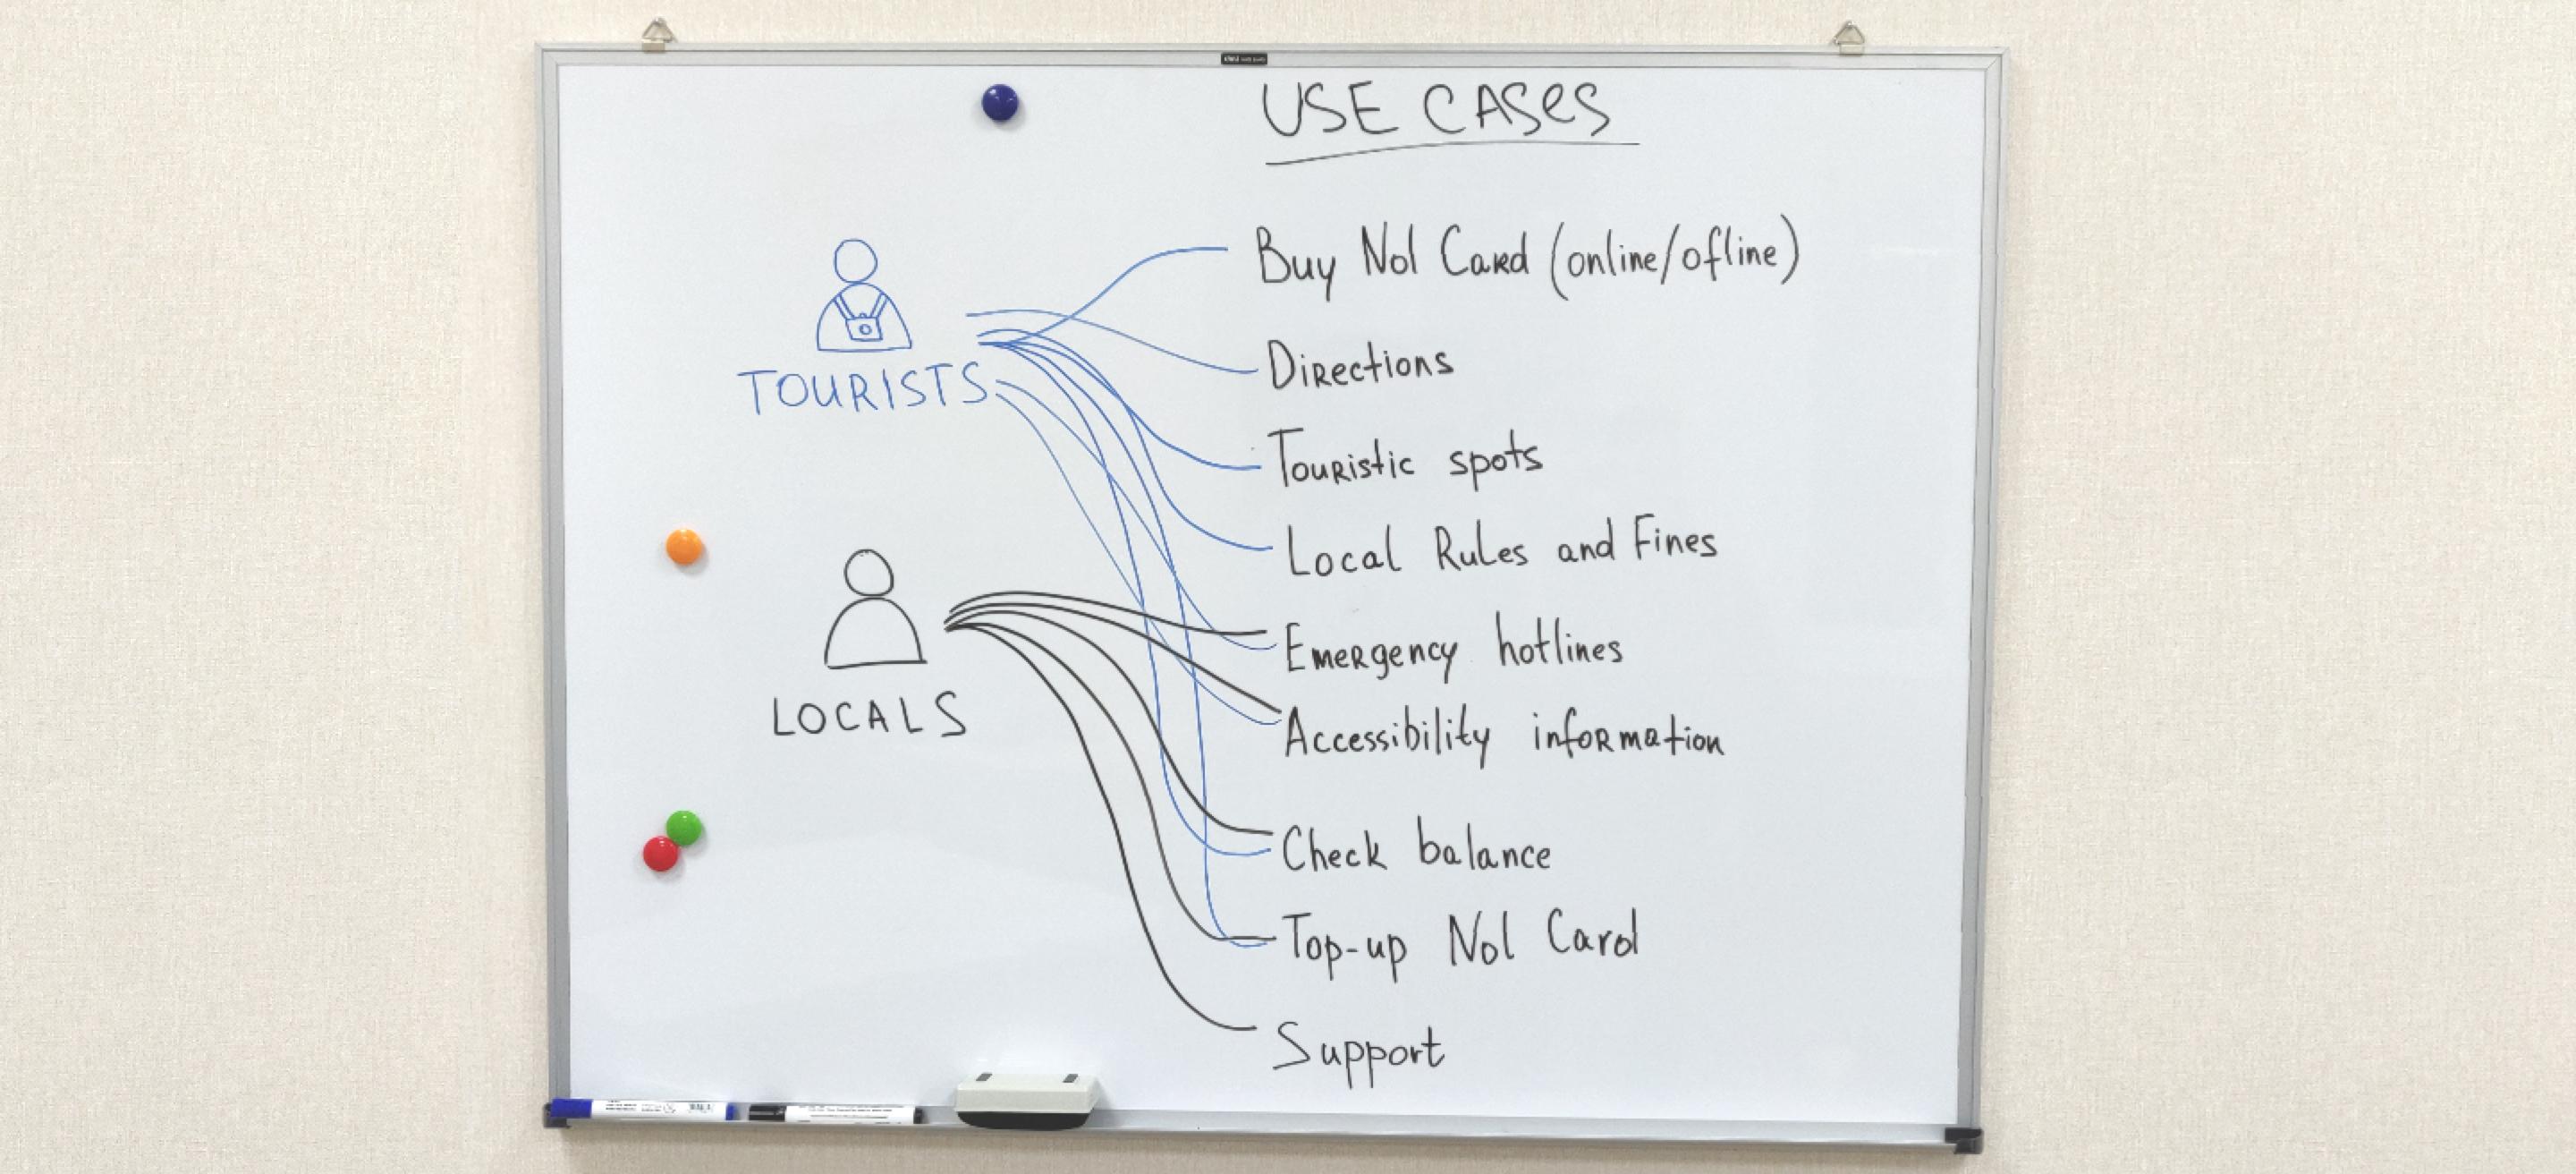 Use cases whiteboard